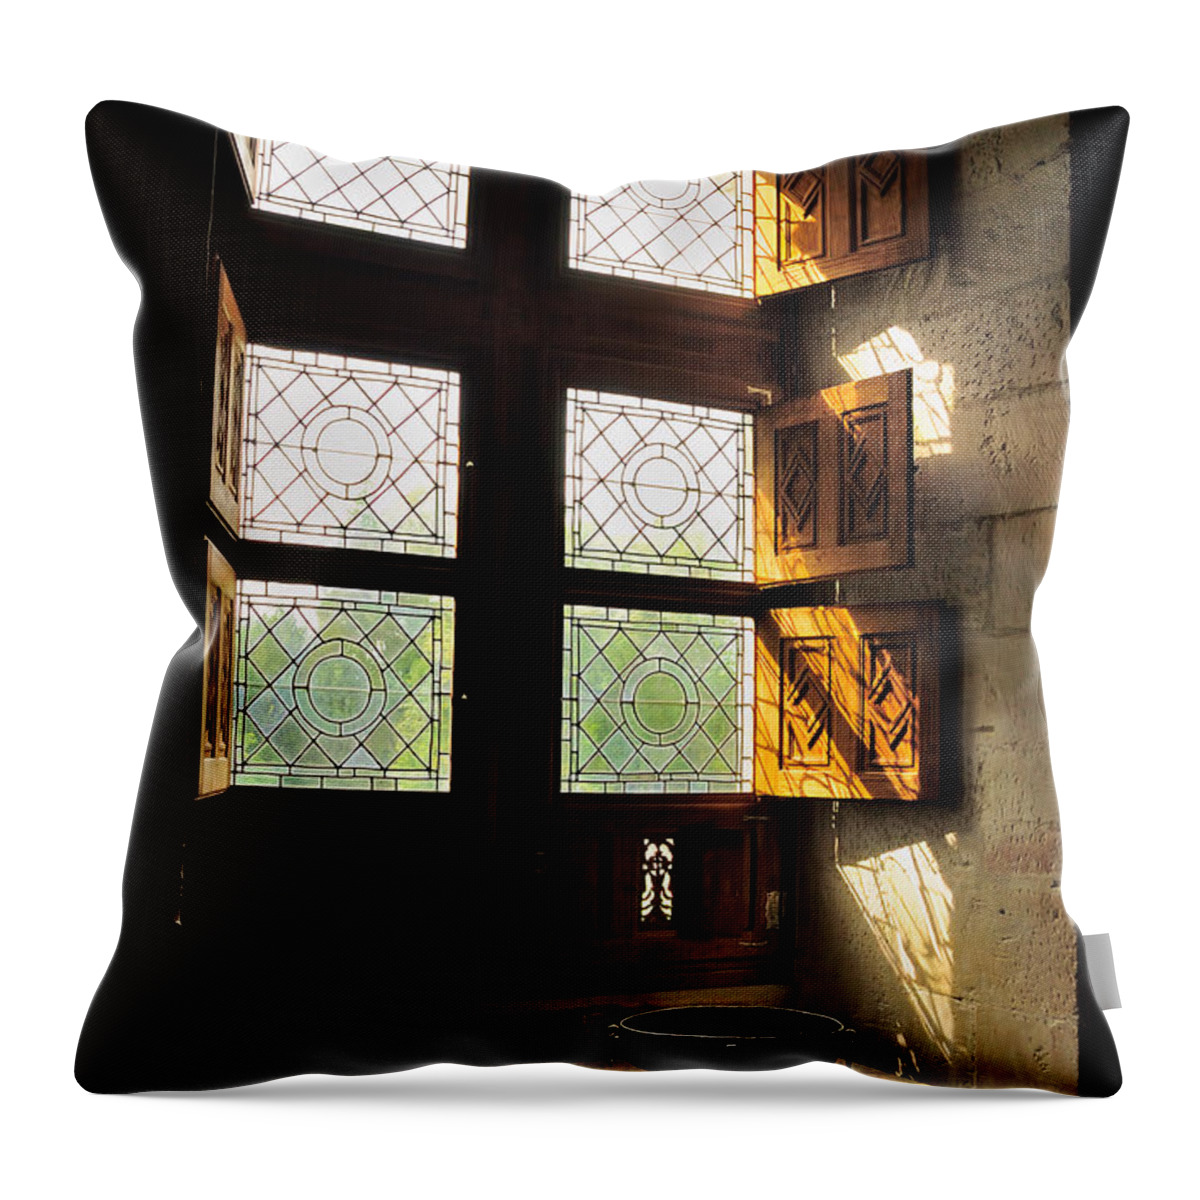 Loire Chateaux Throw Pillow featuring the photograph Northern Light by Nigel Fletcher-Jones